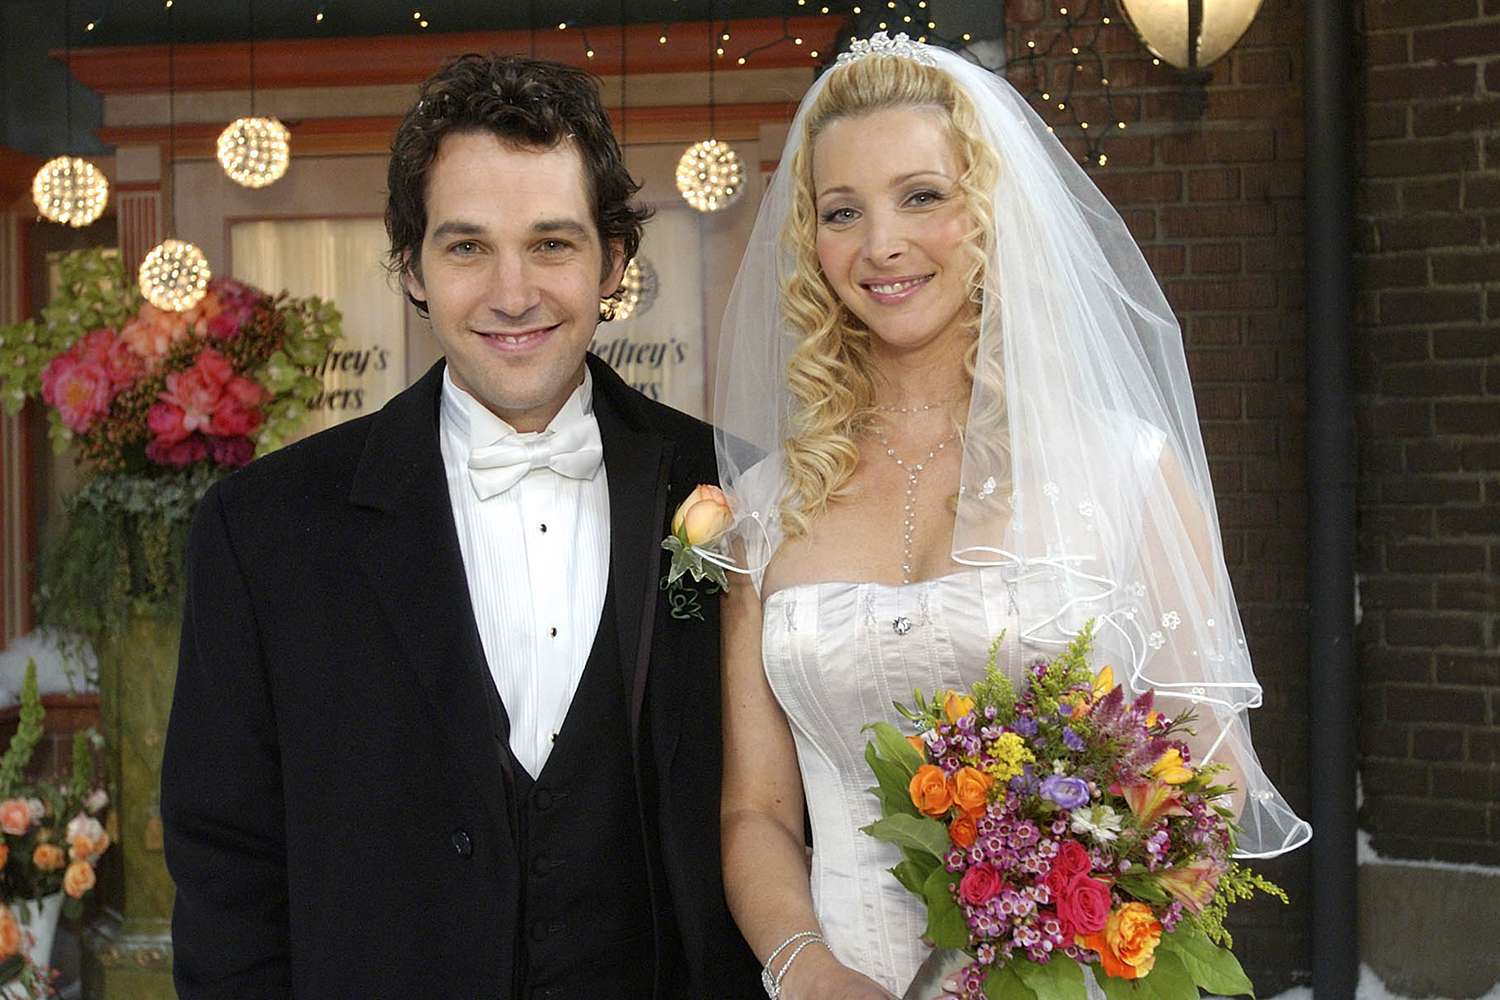 FRIENDS -- "The One With Phoebe's Wedding" -- Episode 12 -- Aired 02/12/2004 -- Pictured: (l-r) Paul Rudd as Mike Hannigan, Lisa Kudrow as Phoebe Buffay